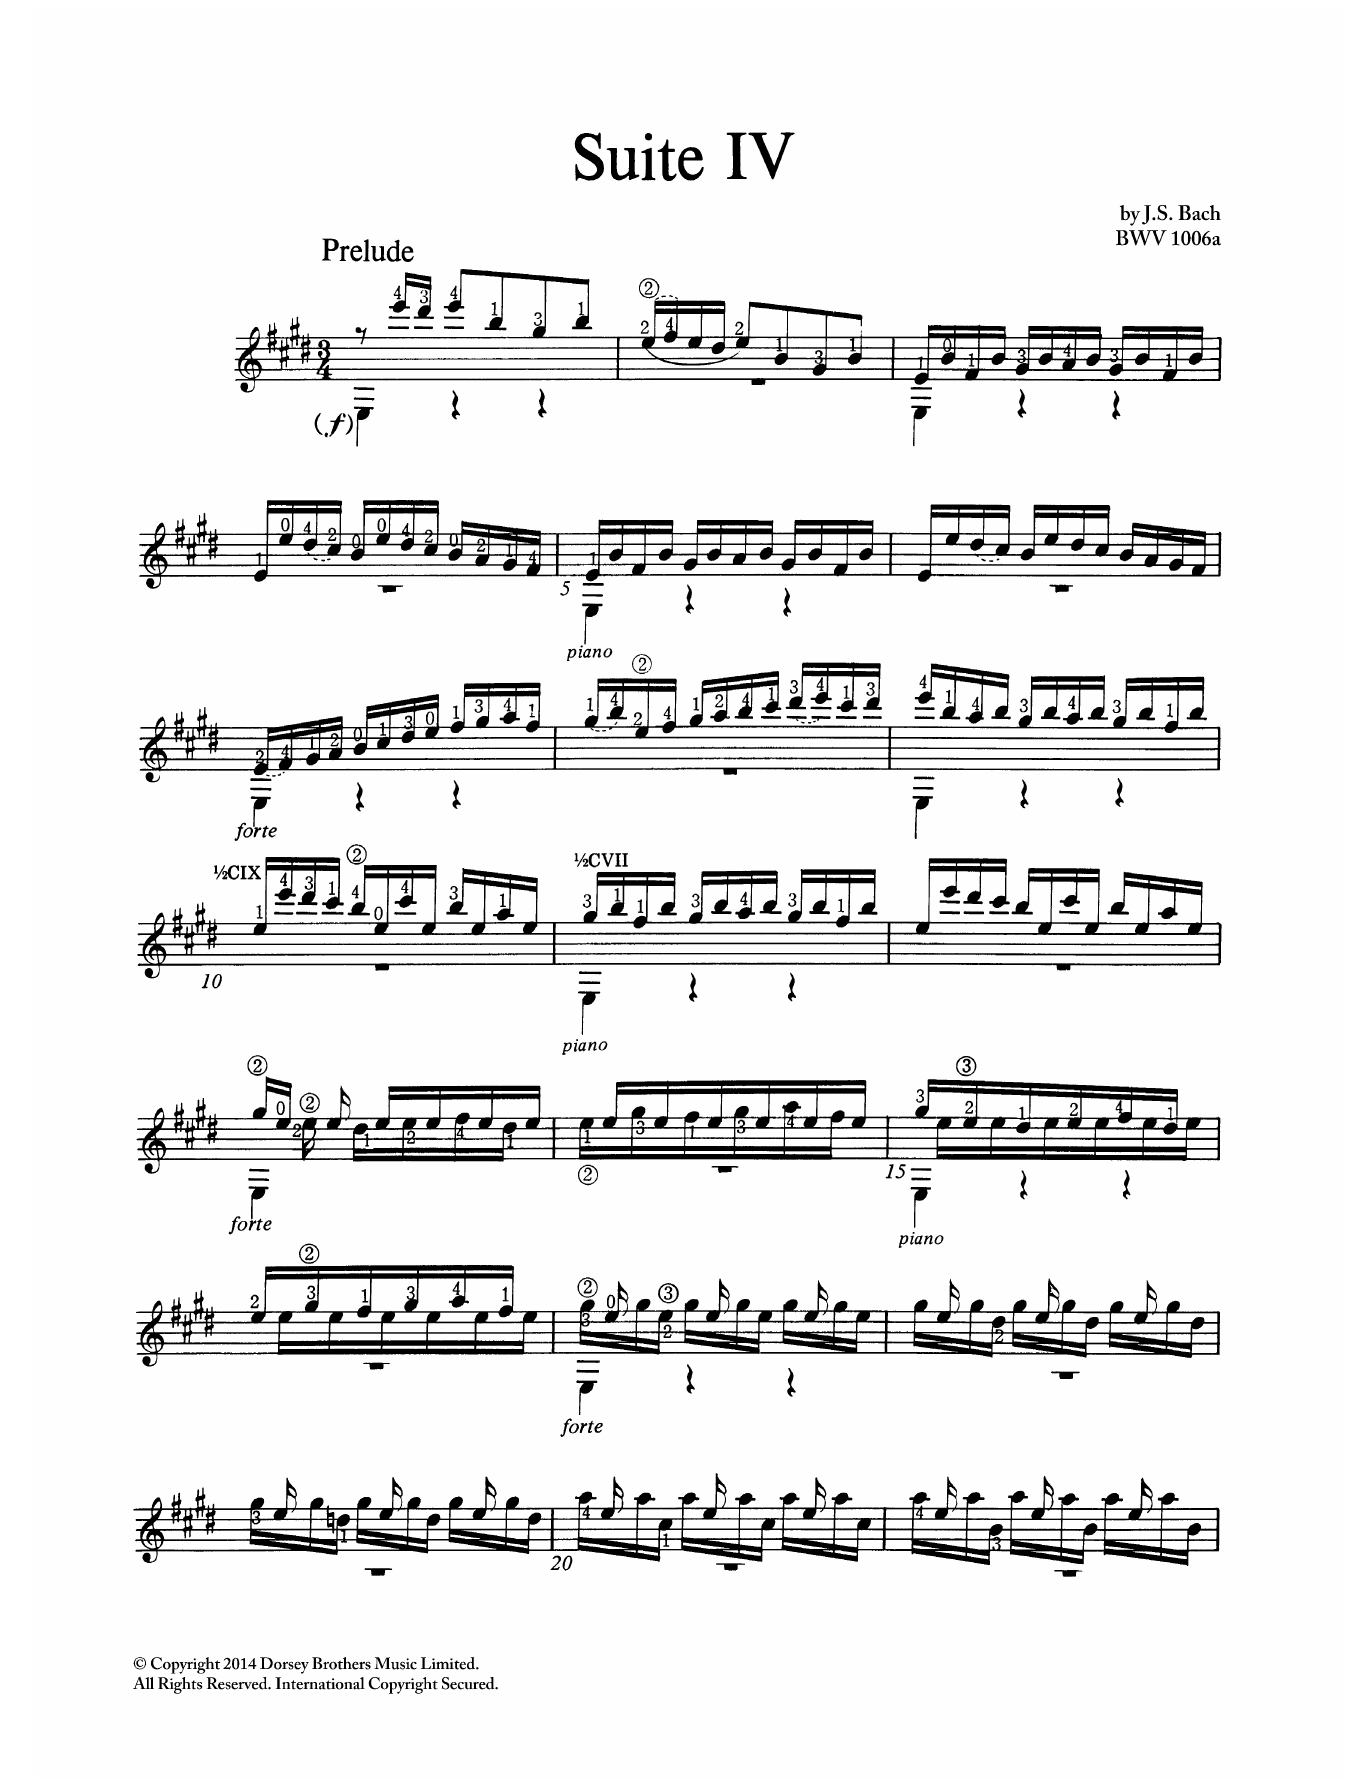 J.S. Bach Suite In E Major BWV 1006A sheet music preview music notes and score for Guitar including 20 page(s)